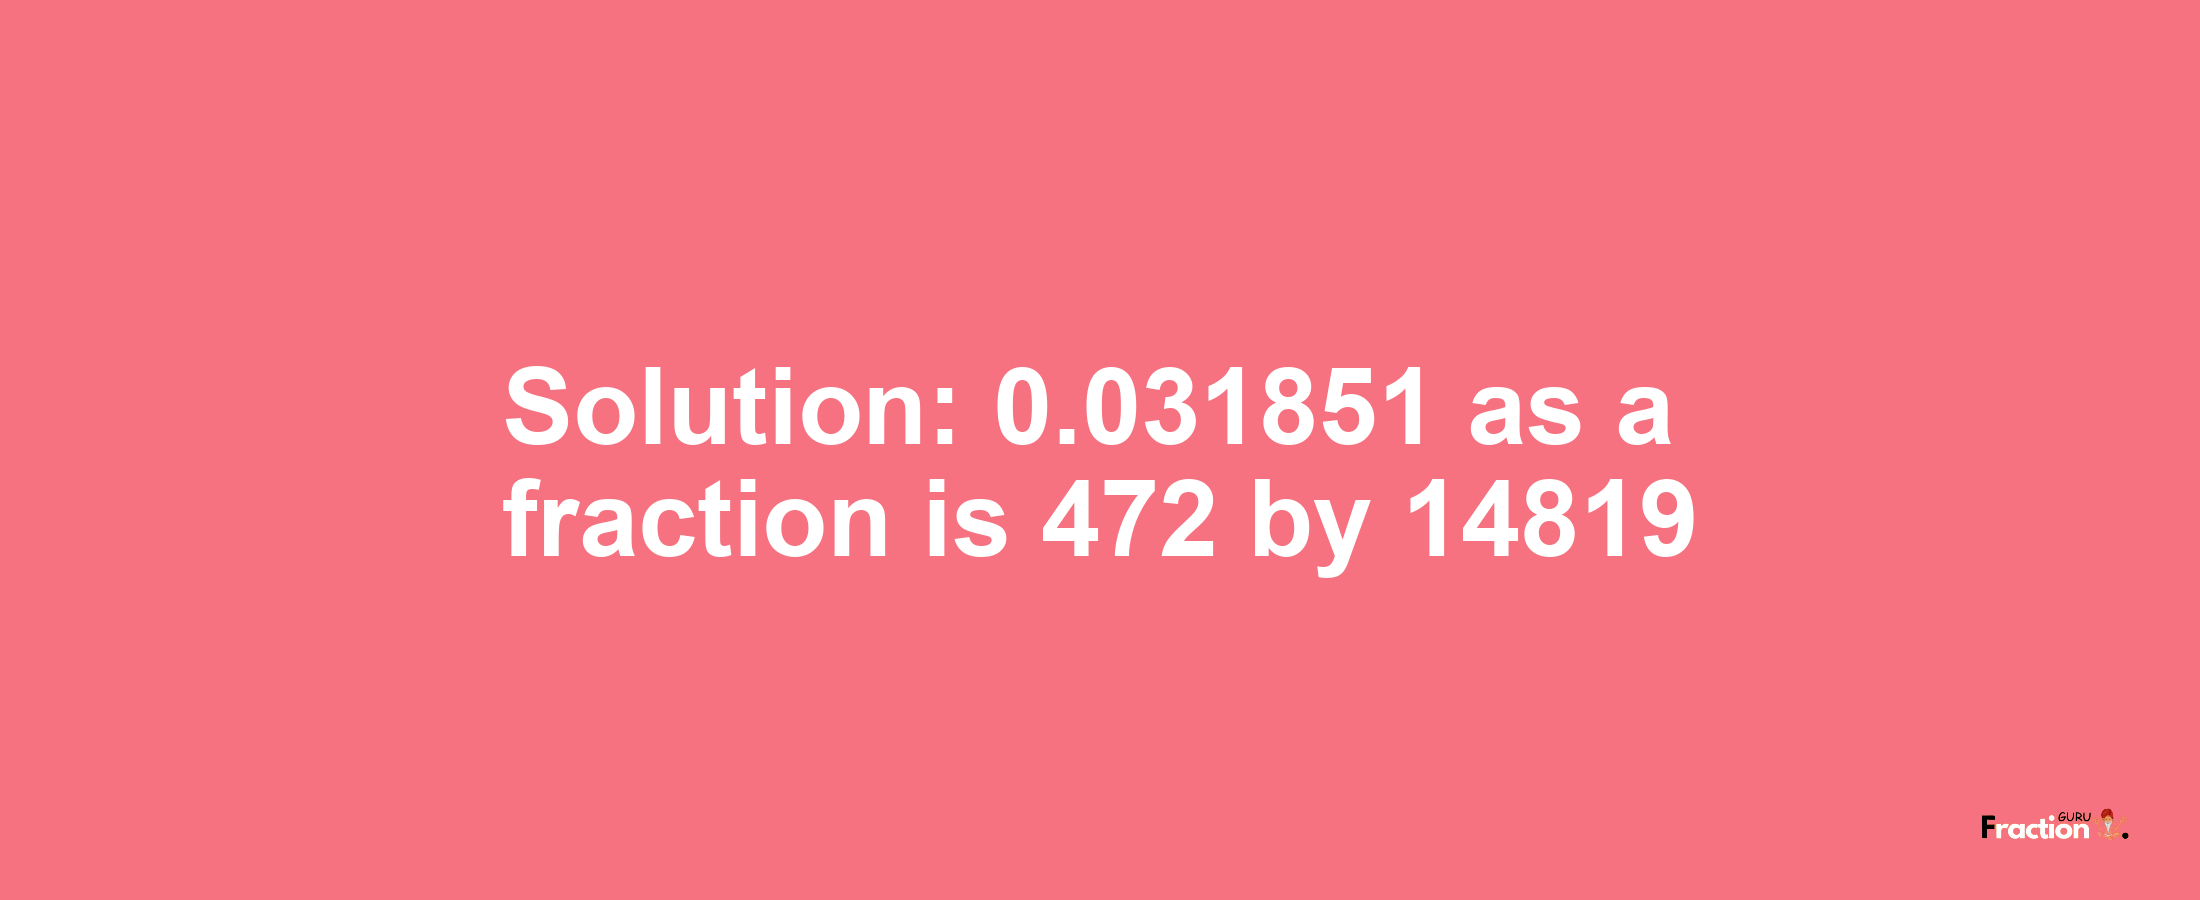 Solution:0.031851 as a fraction is 472/14819